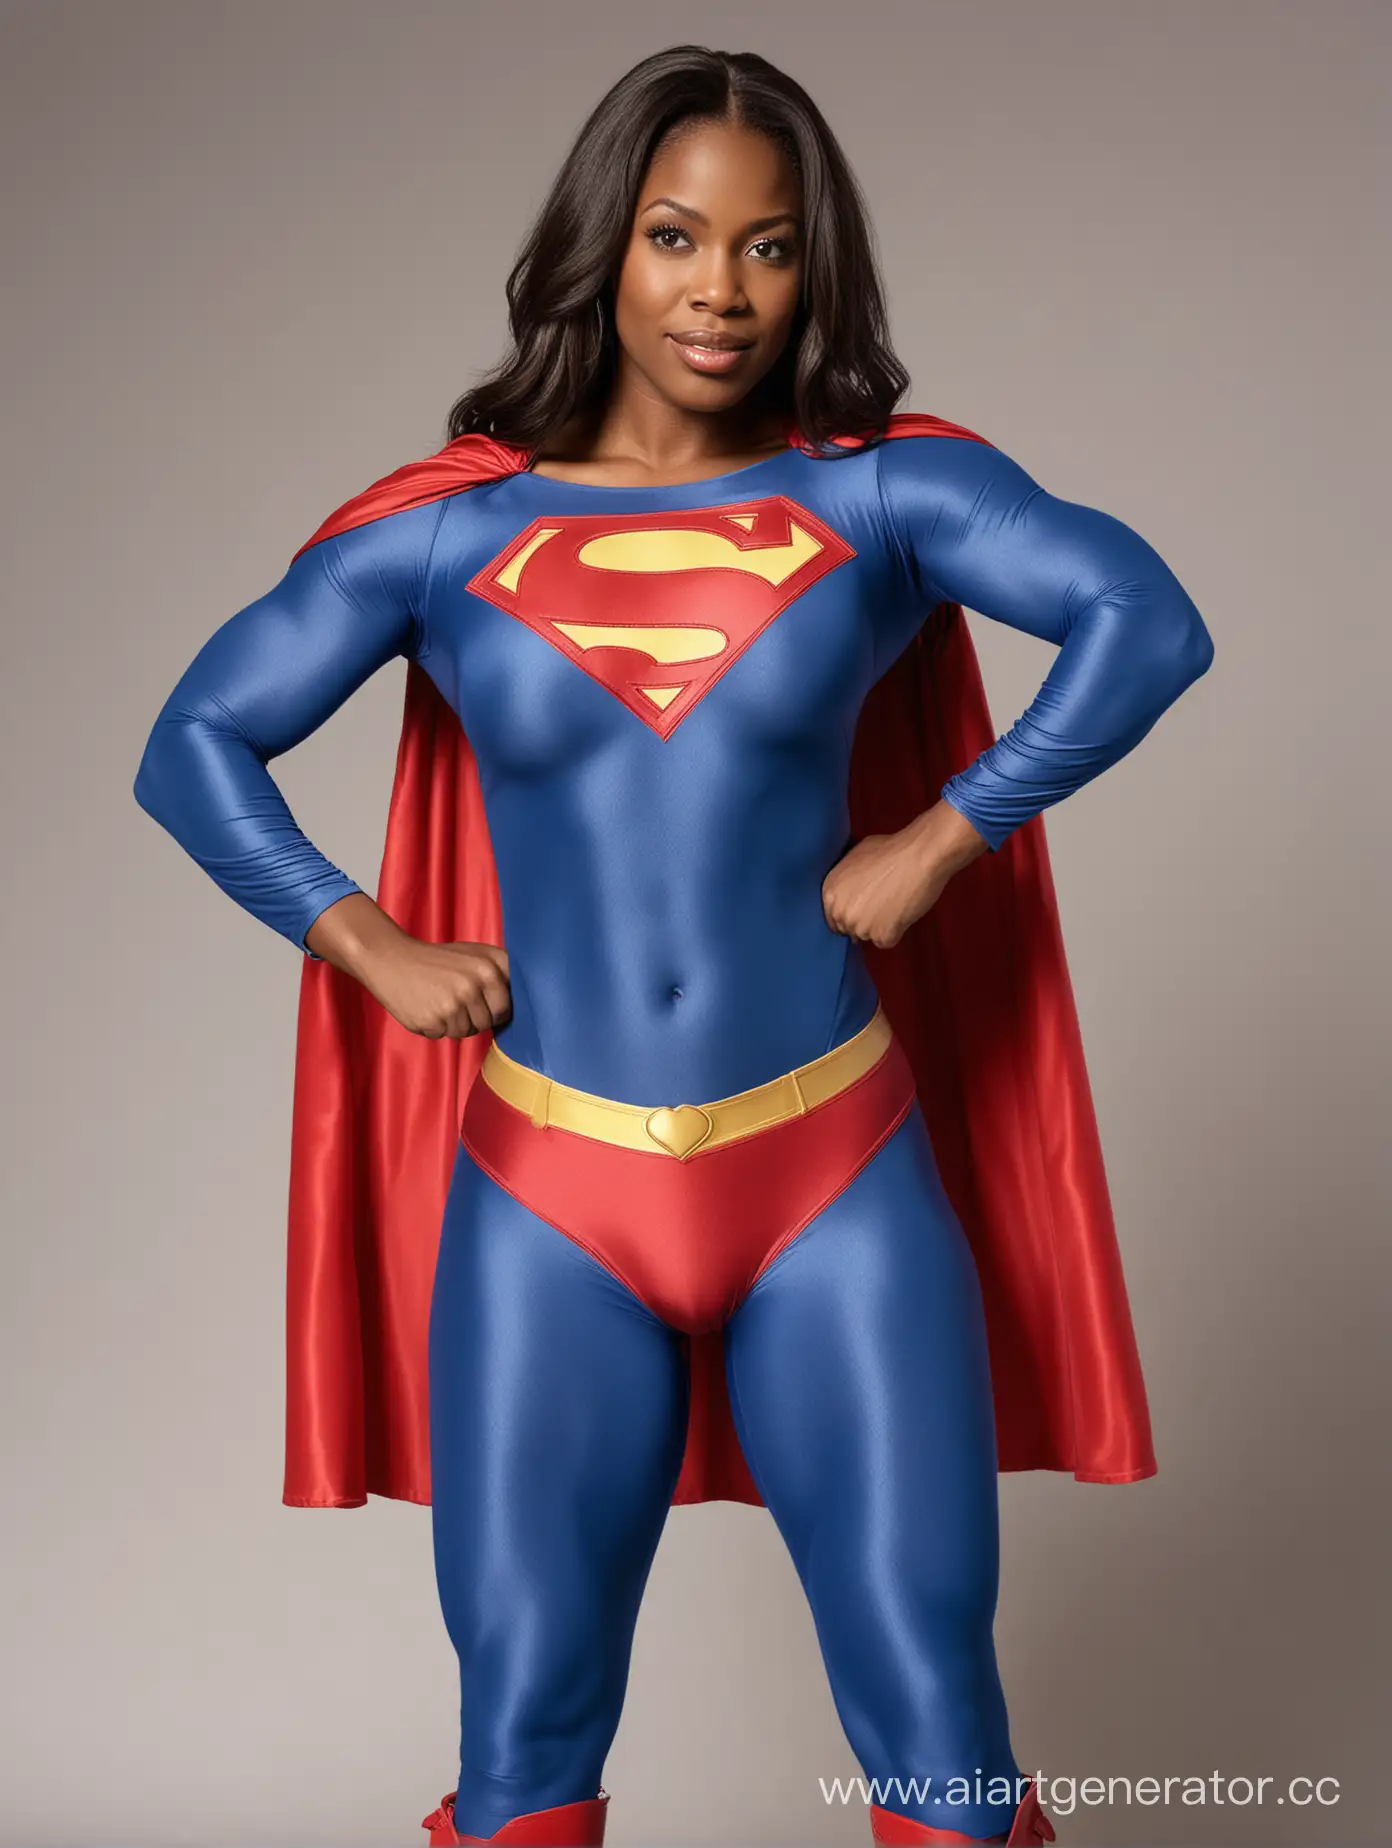 Confident-African-American-Woman-Flexing-Muscles-in-Superman-Costume